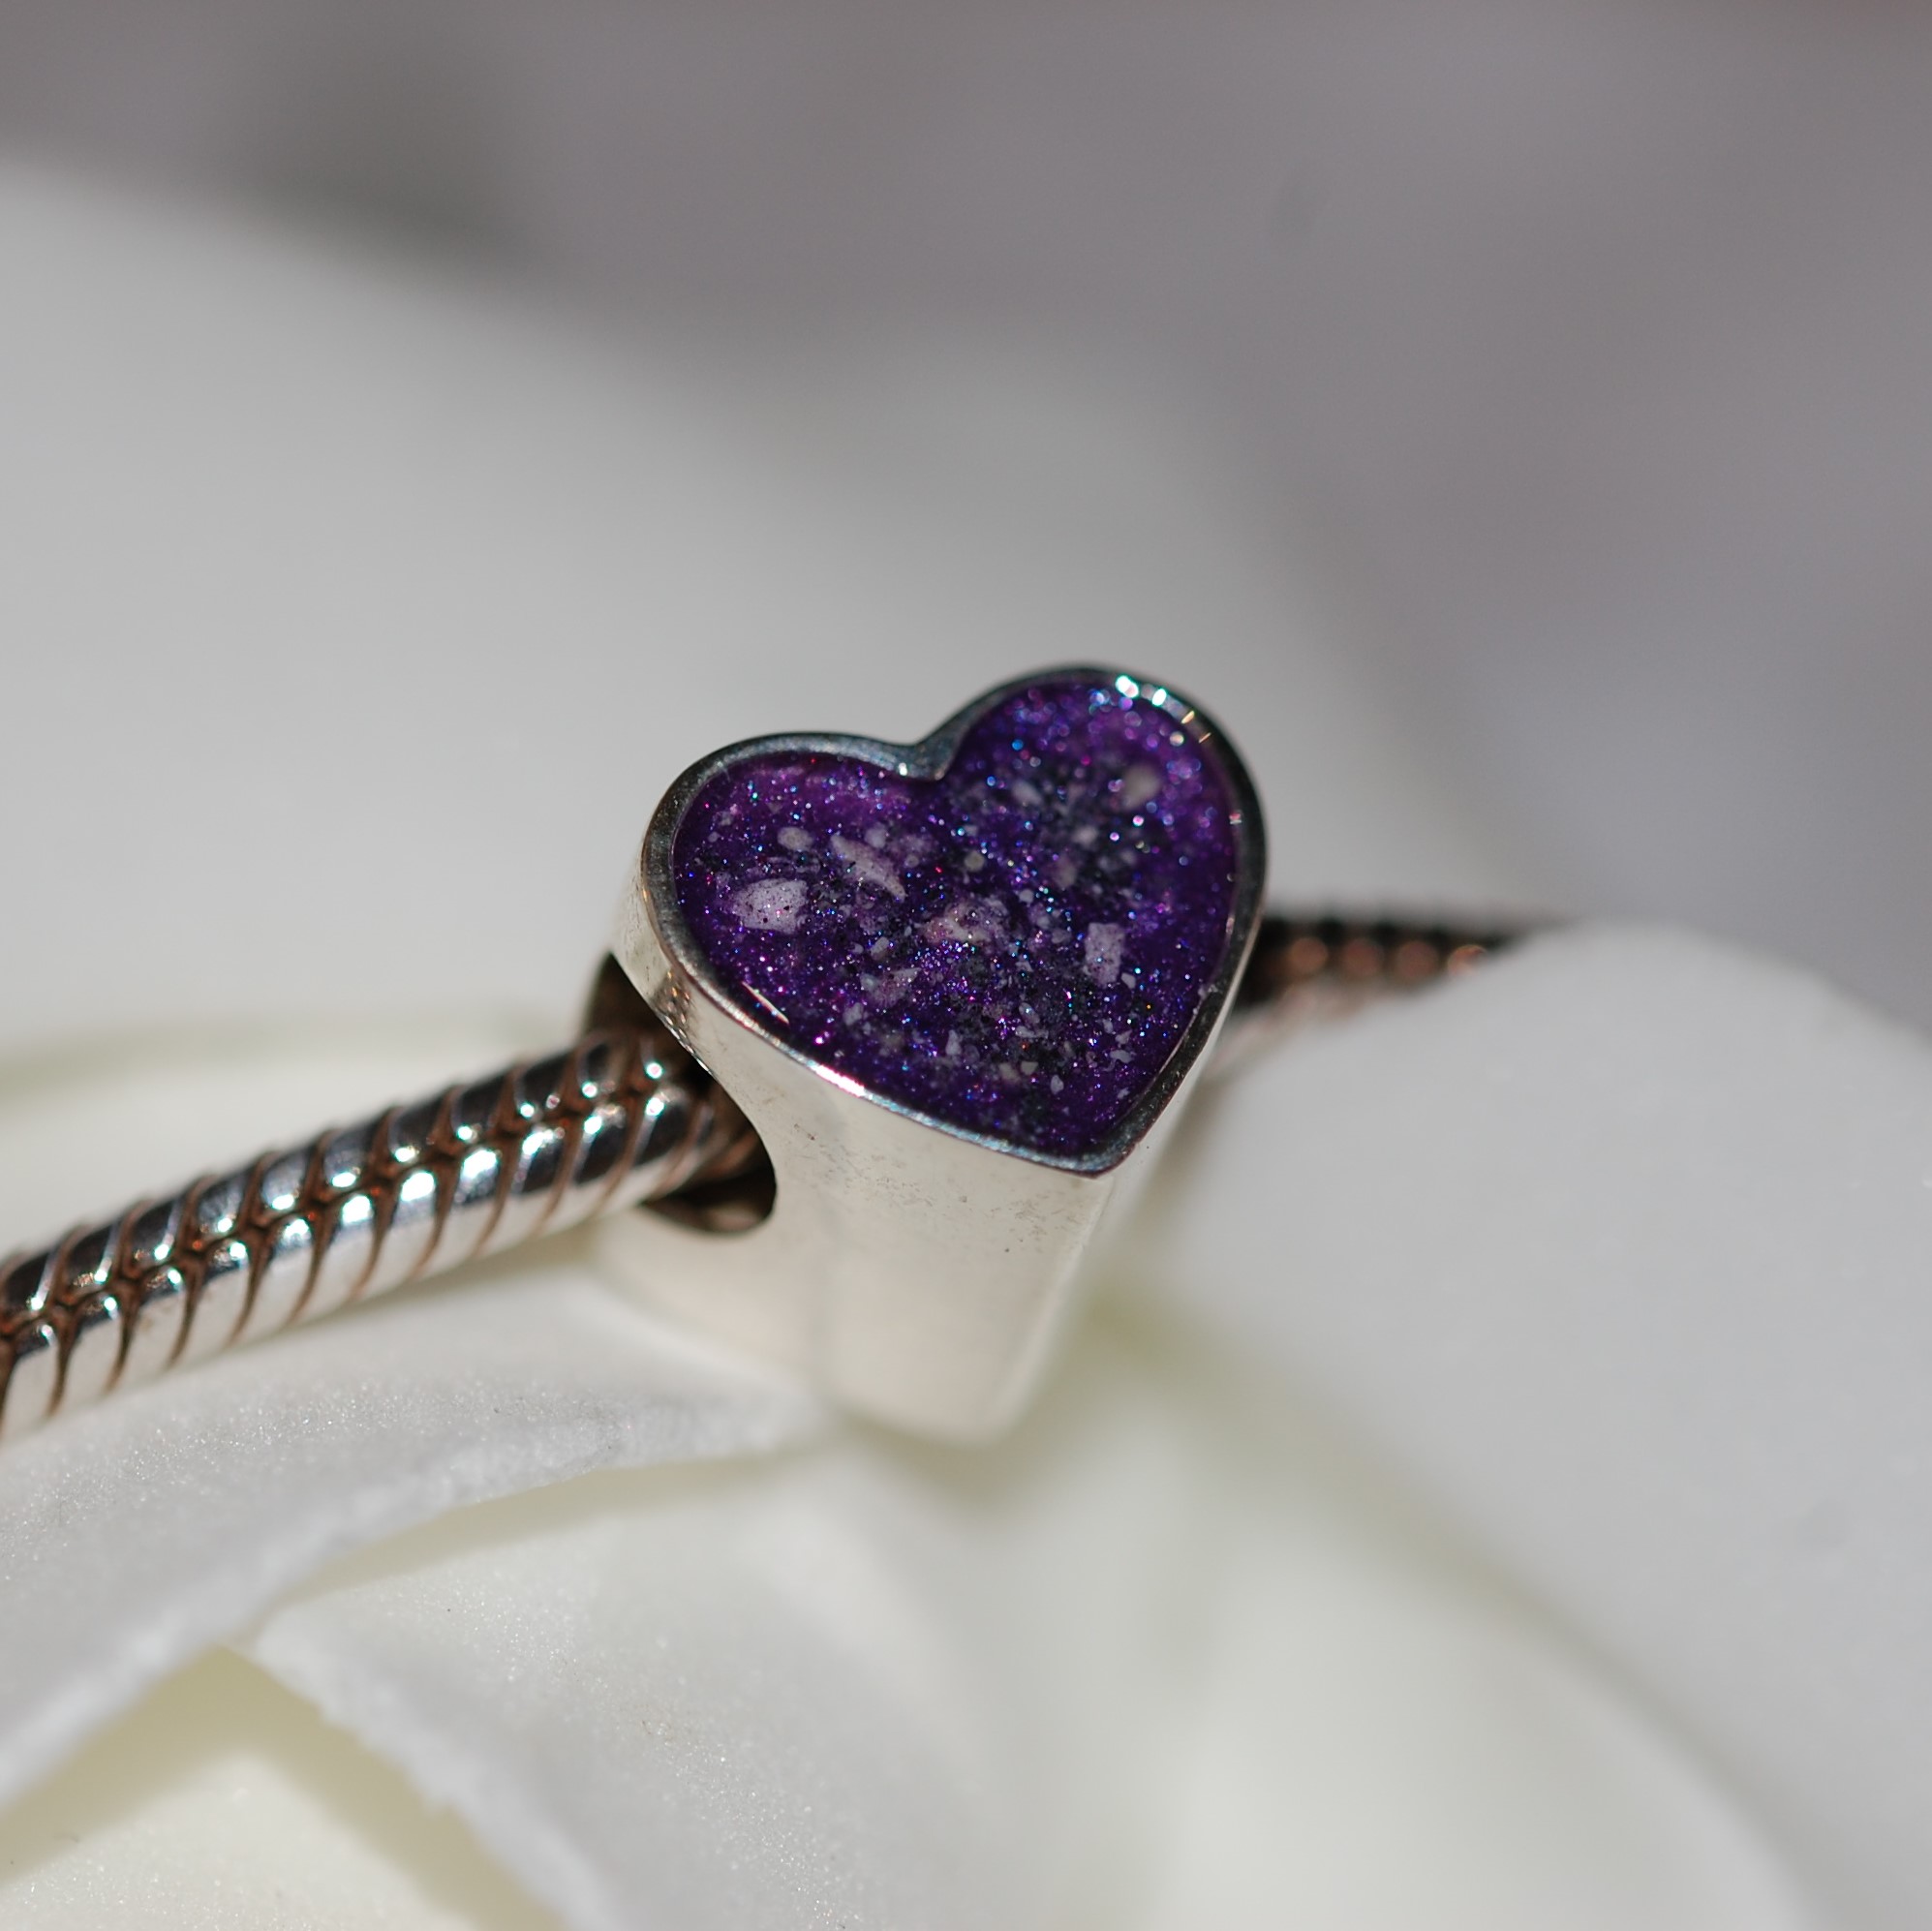 Silver heart charm bead with pet cremation ashes and violet colour